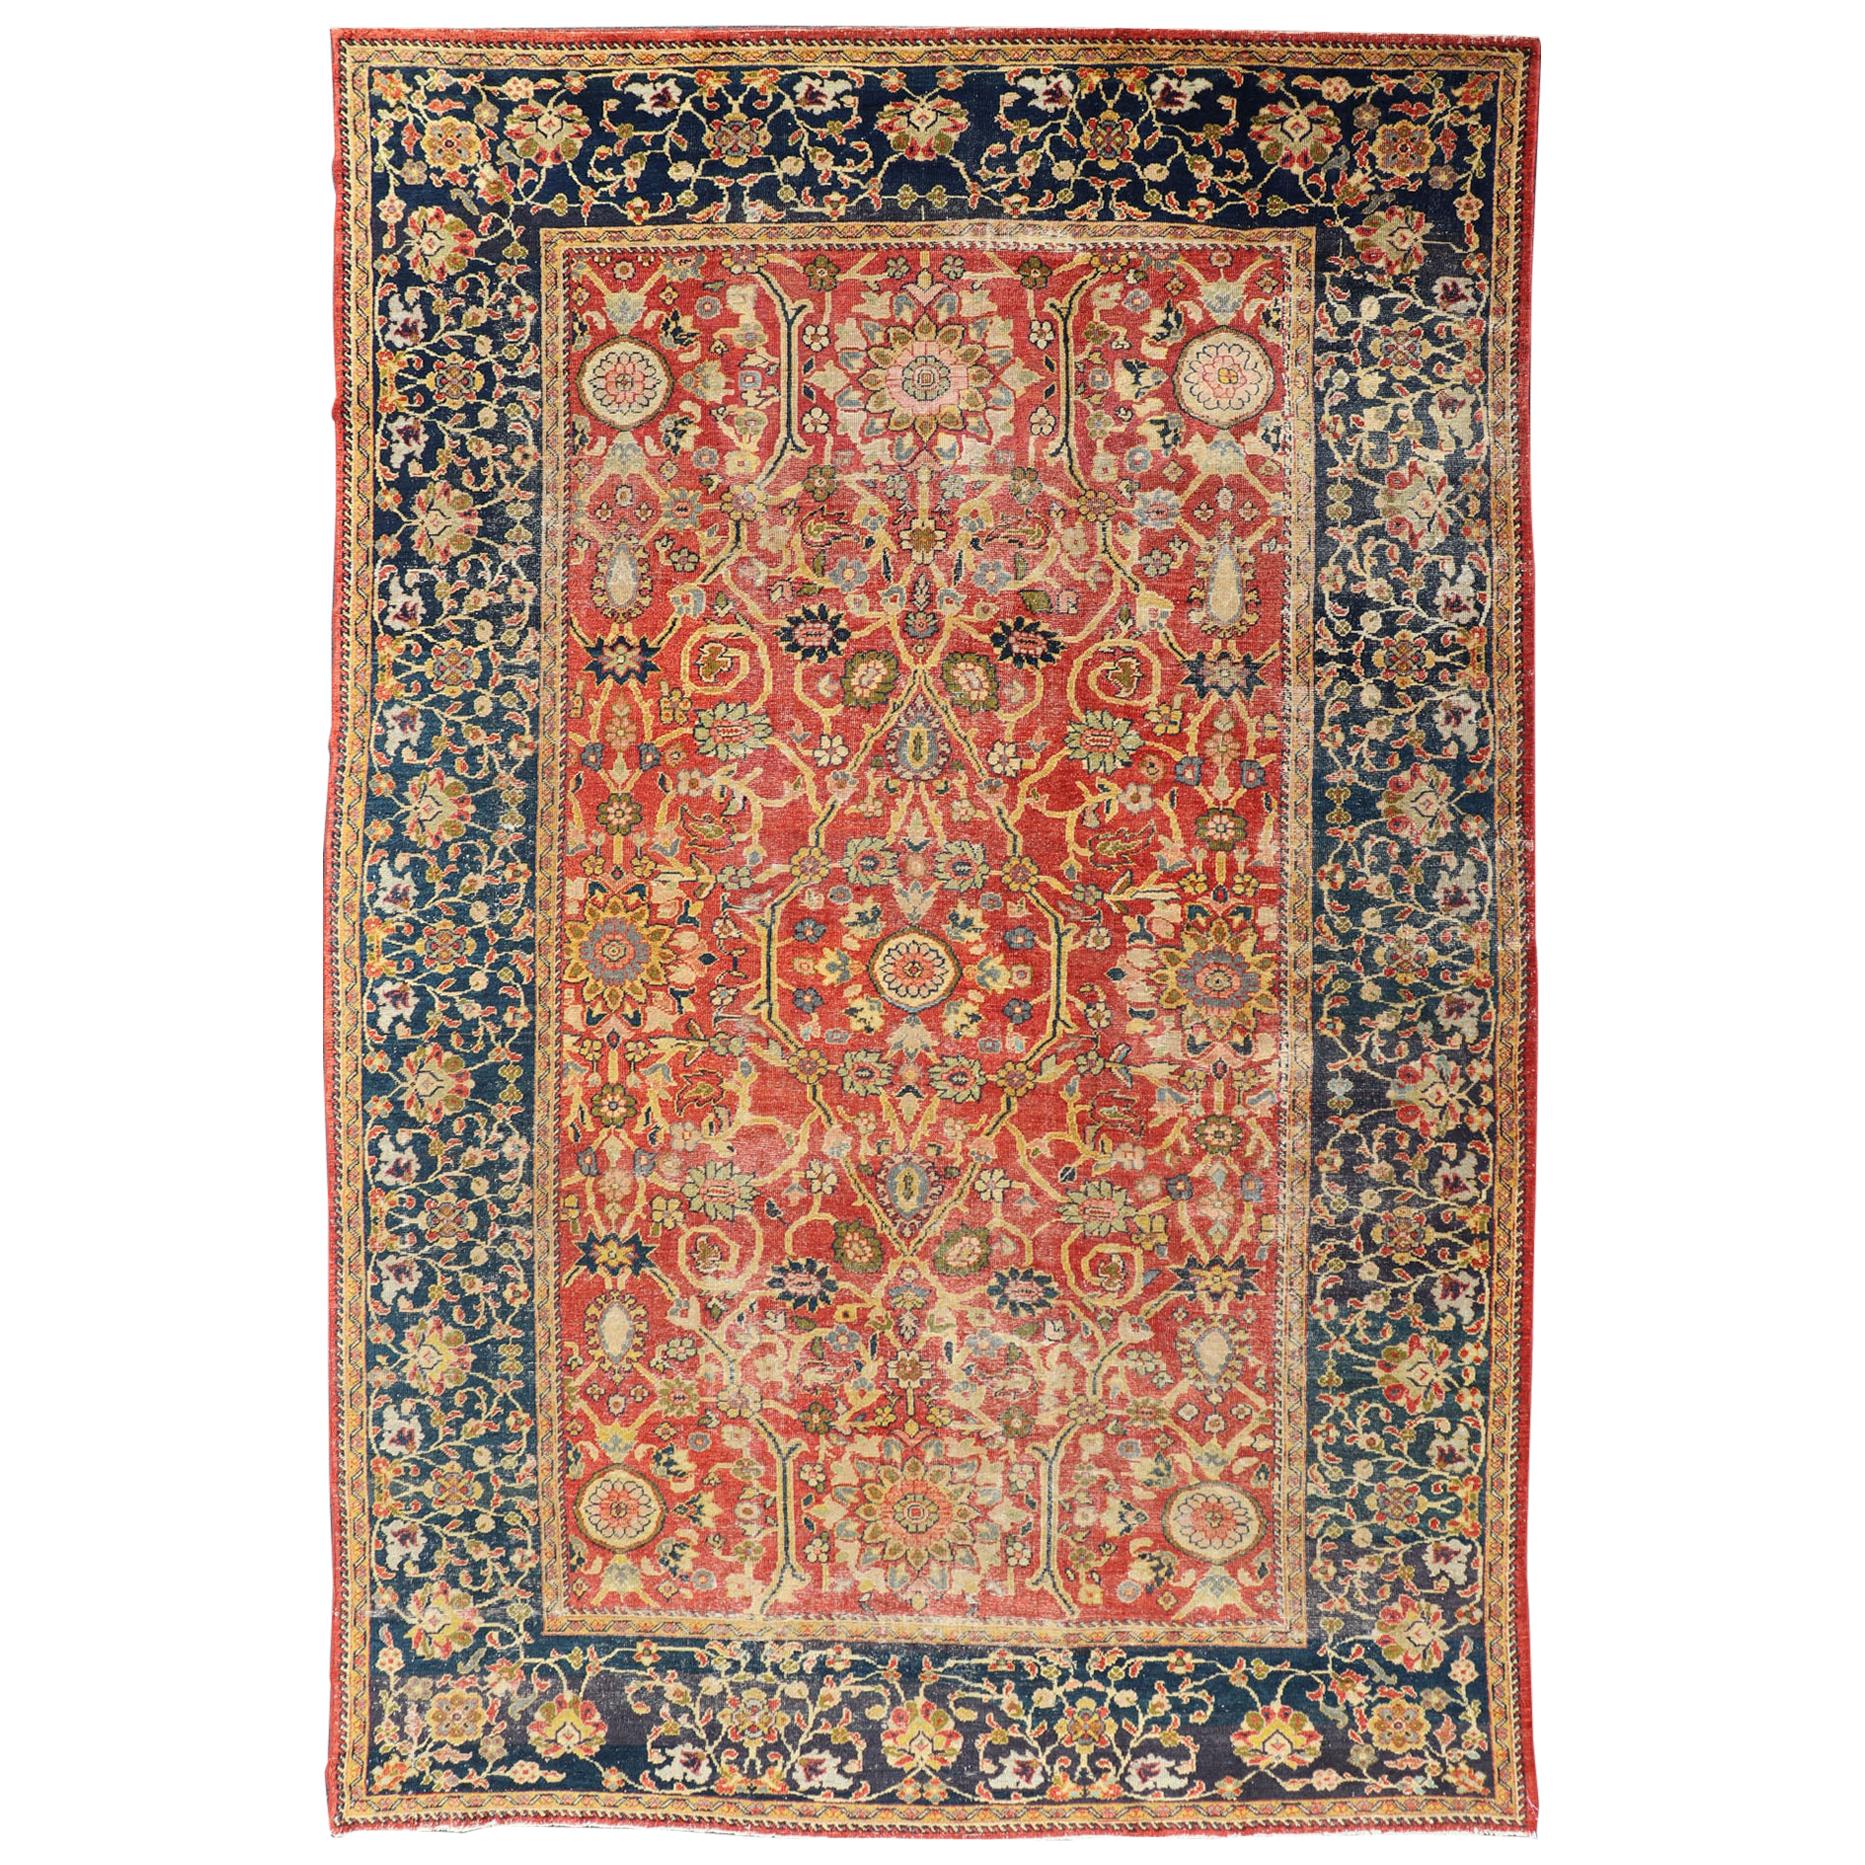 Antique Persian, 19th Century Sultanabad Rug in Rust, Blue, Gold, Yellow & Green